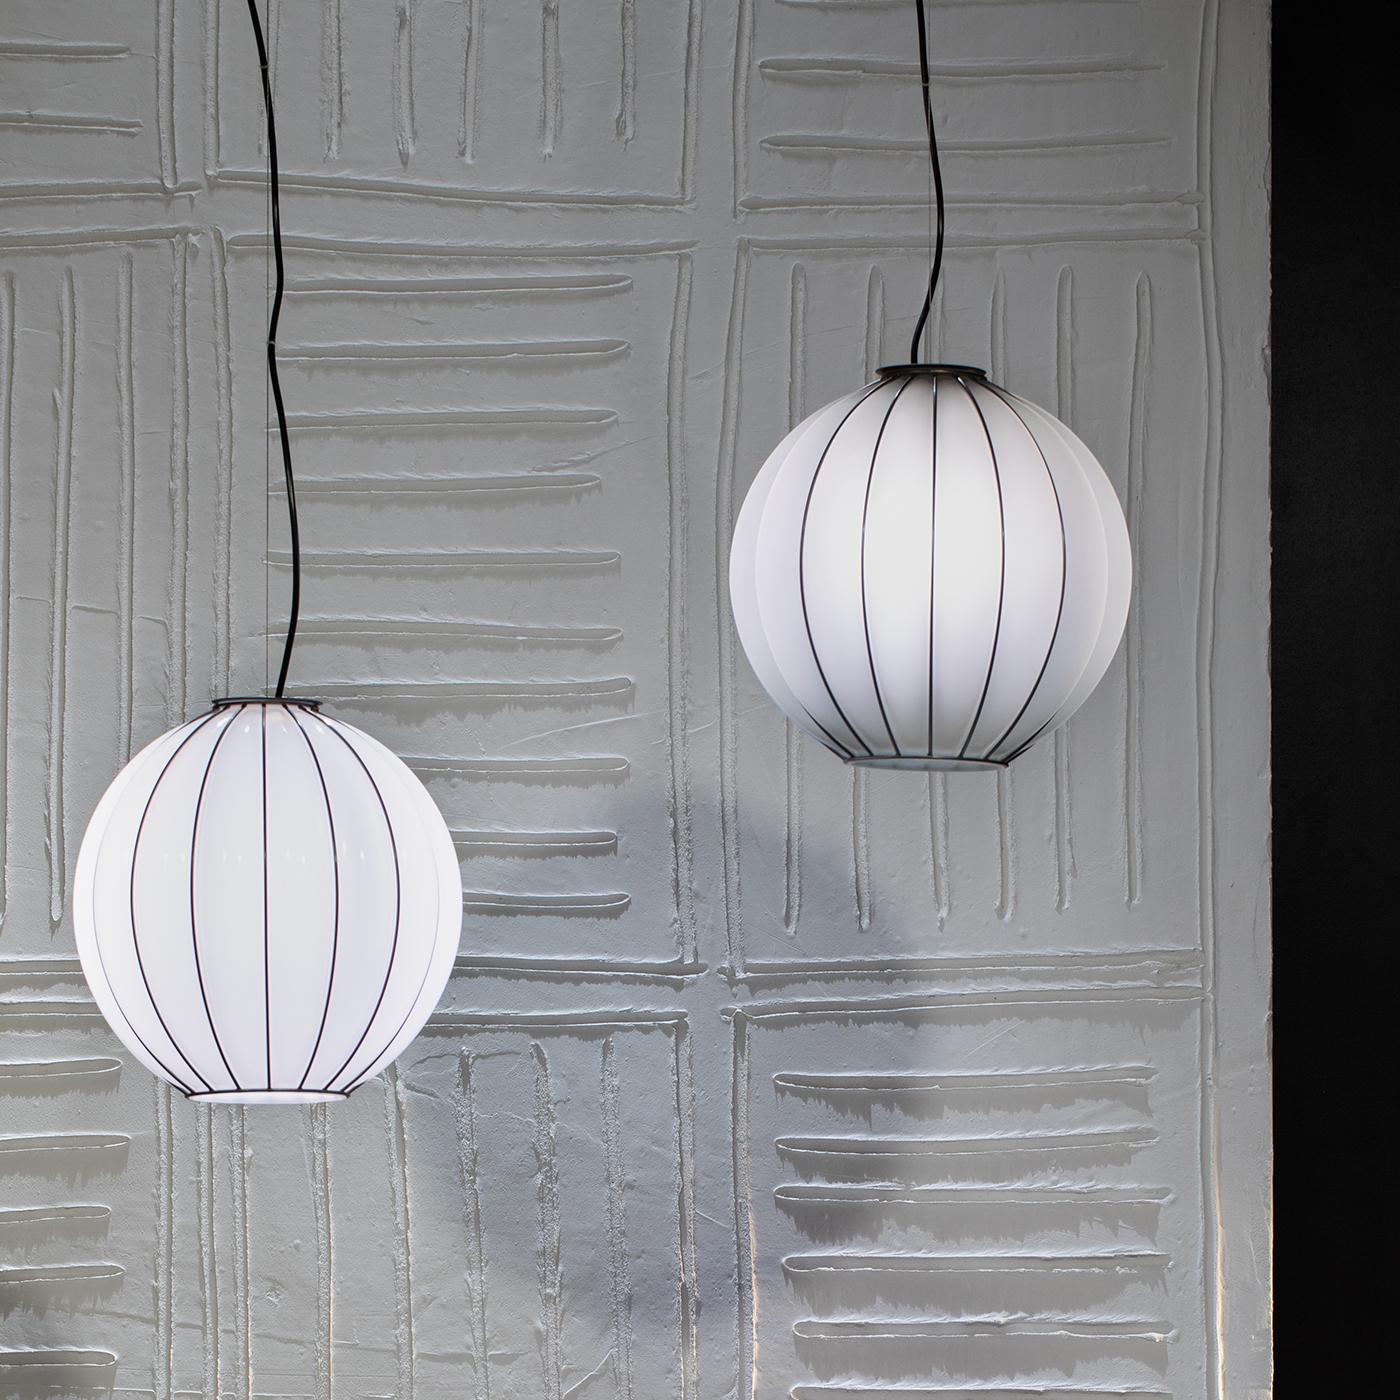 Also offered in a table counterpart allowing for cohesive displays, this precious pendant lamp reveals a clear industrial inspiration defined by the integration of a spherical diffuser in mouth-blown, white Murano glass. Master artisans blow the